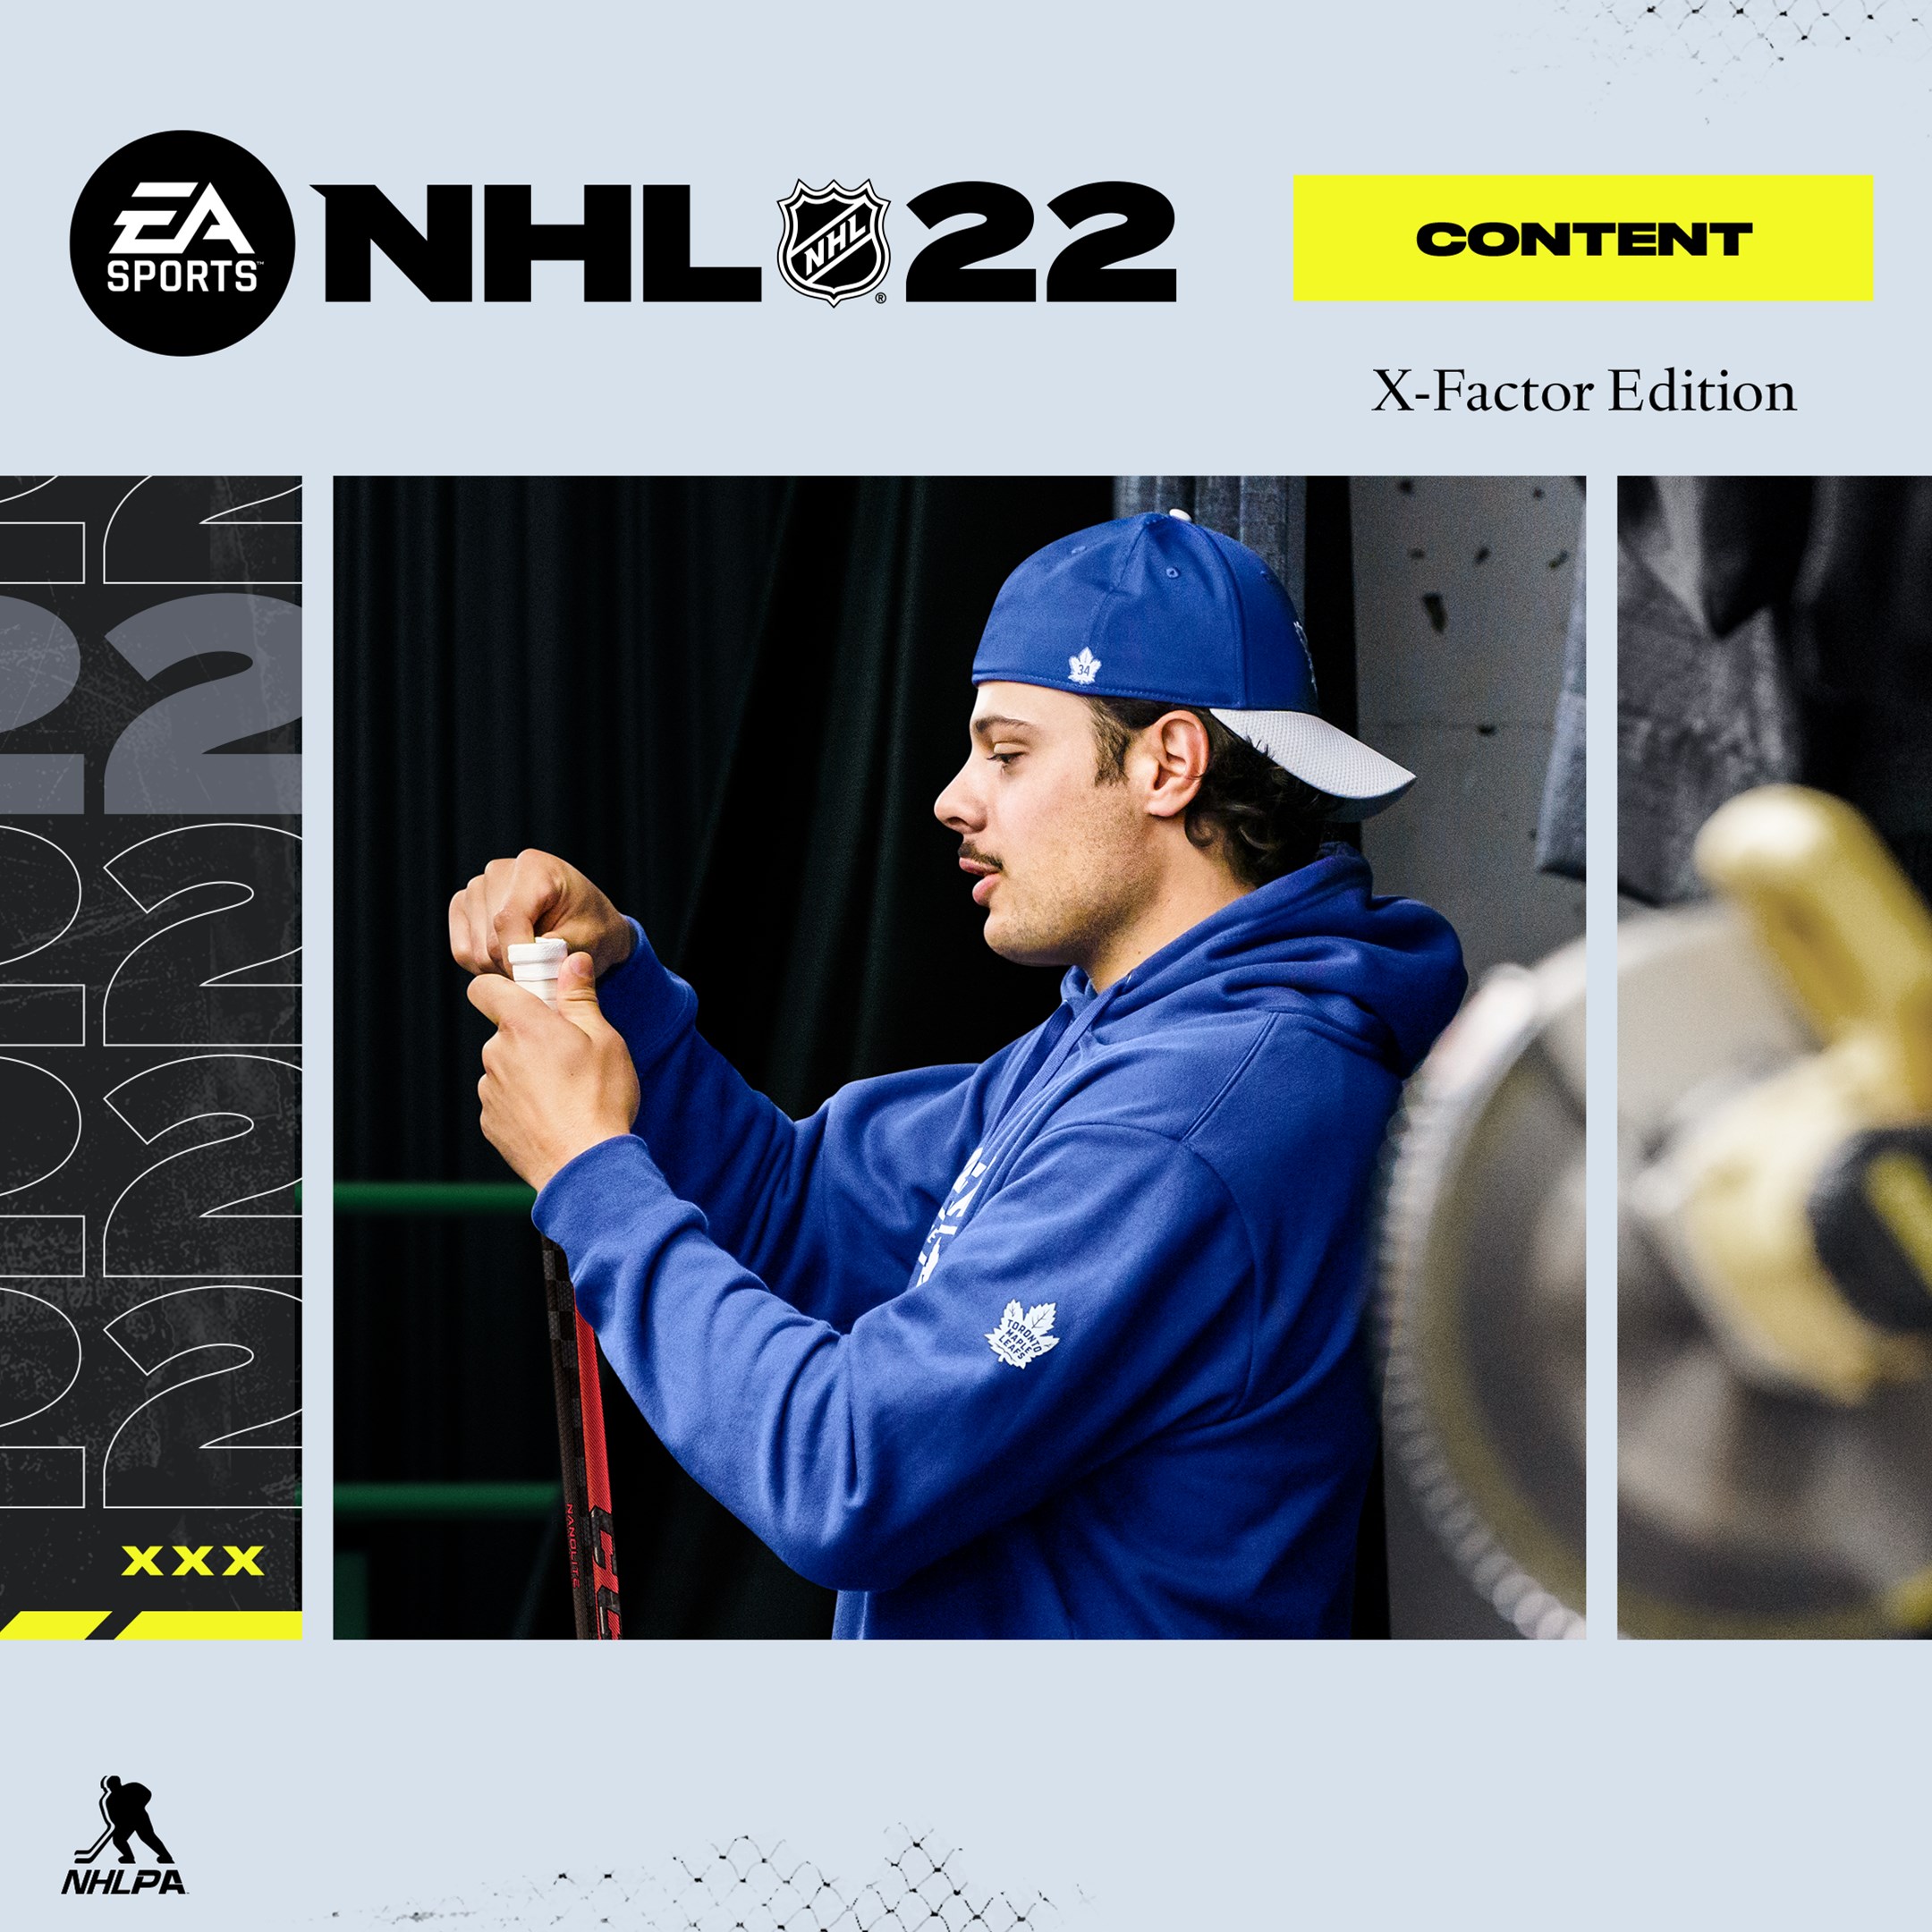 NHL® 22 X-Factor Edition Content